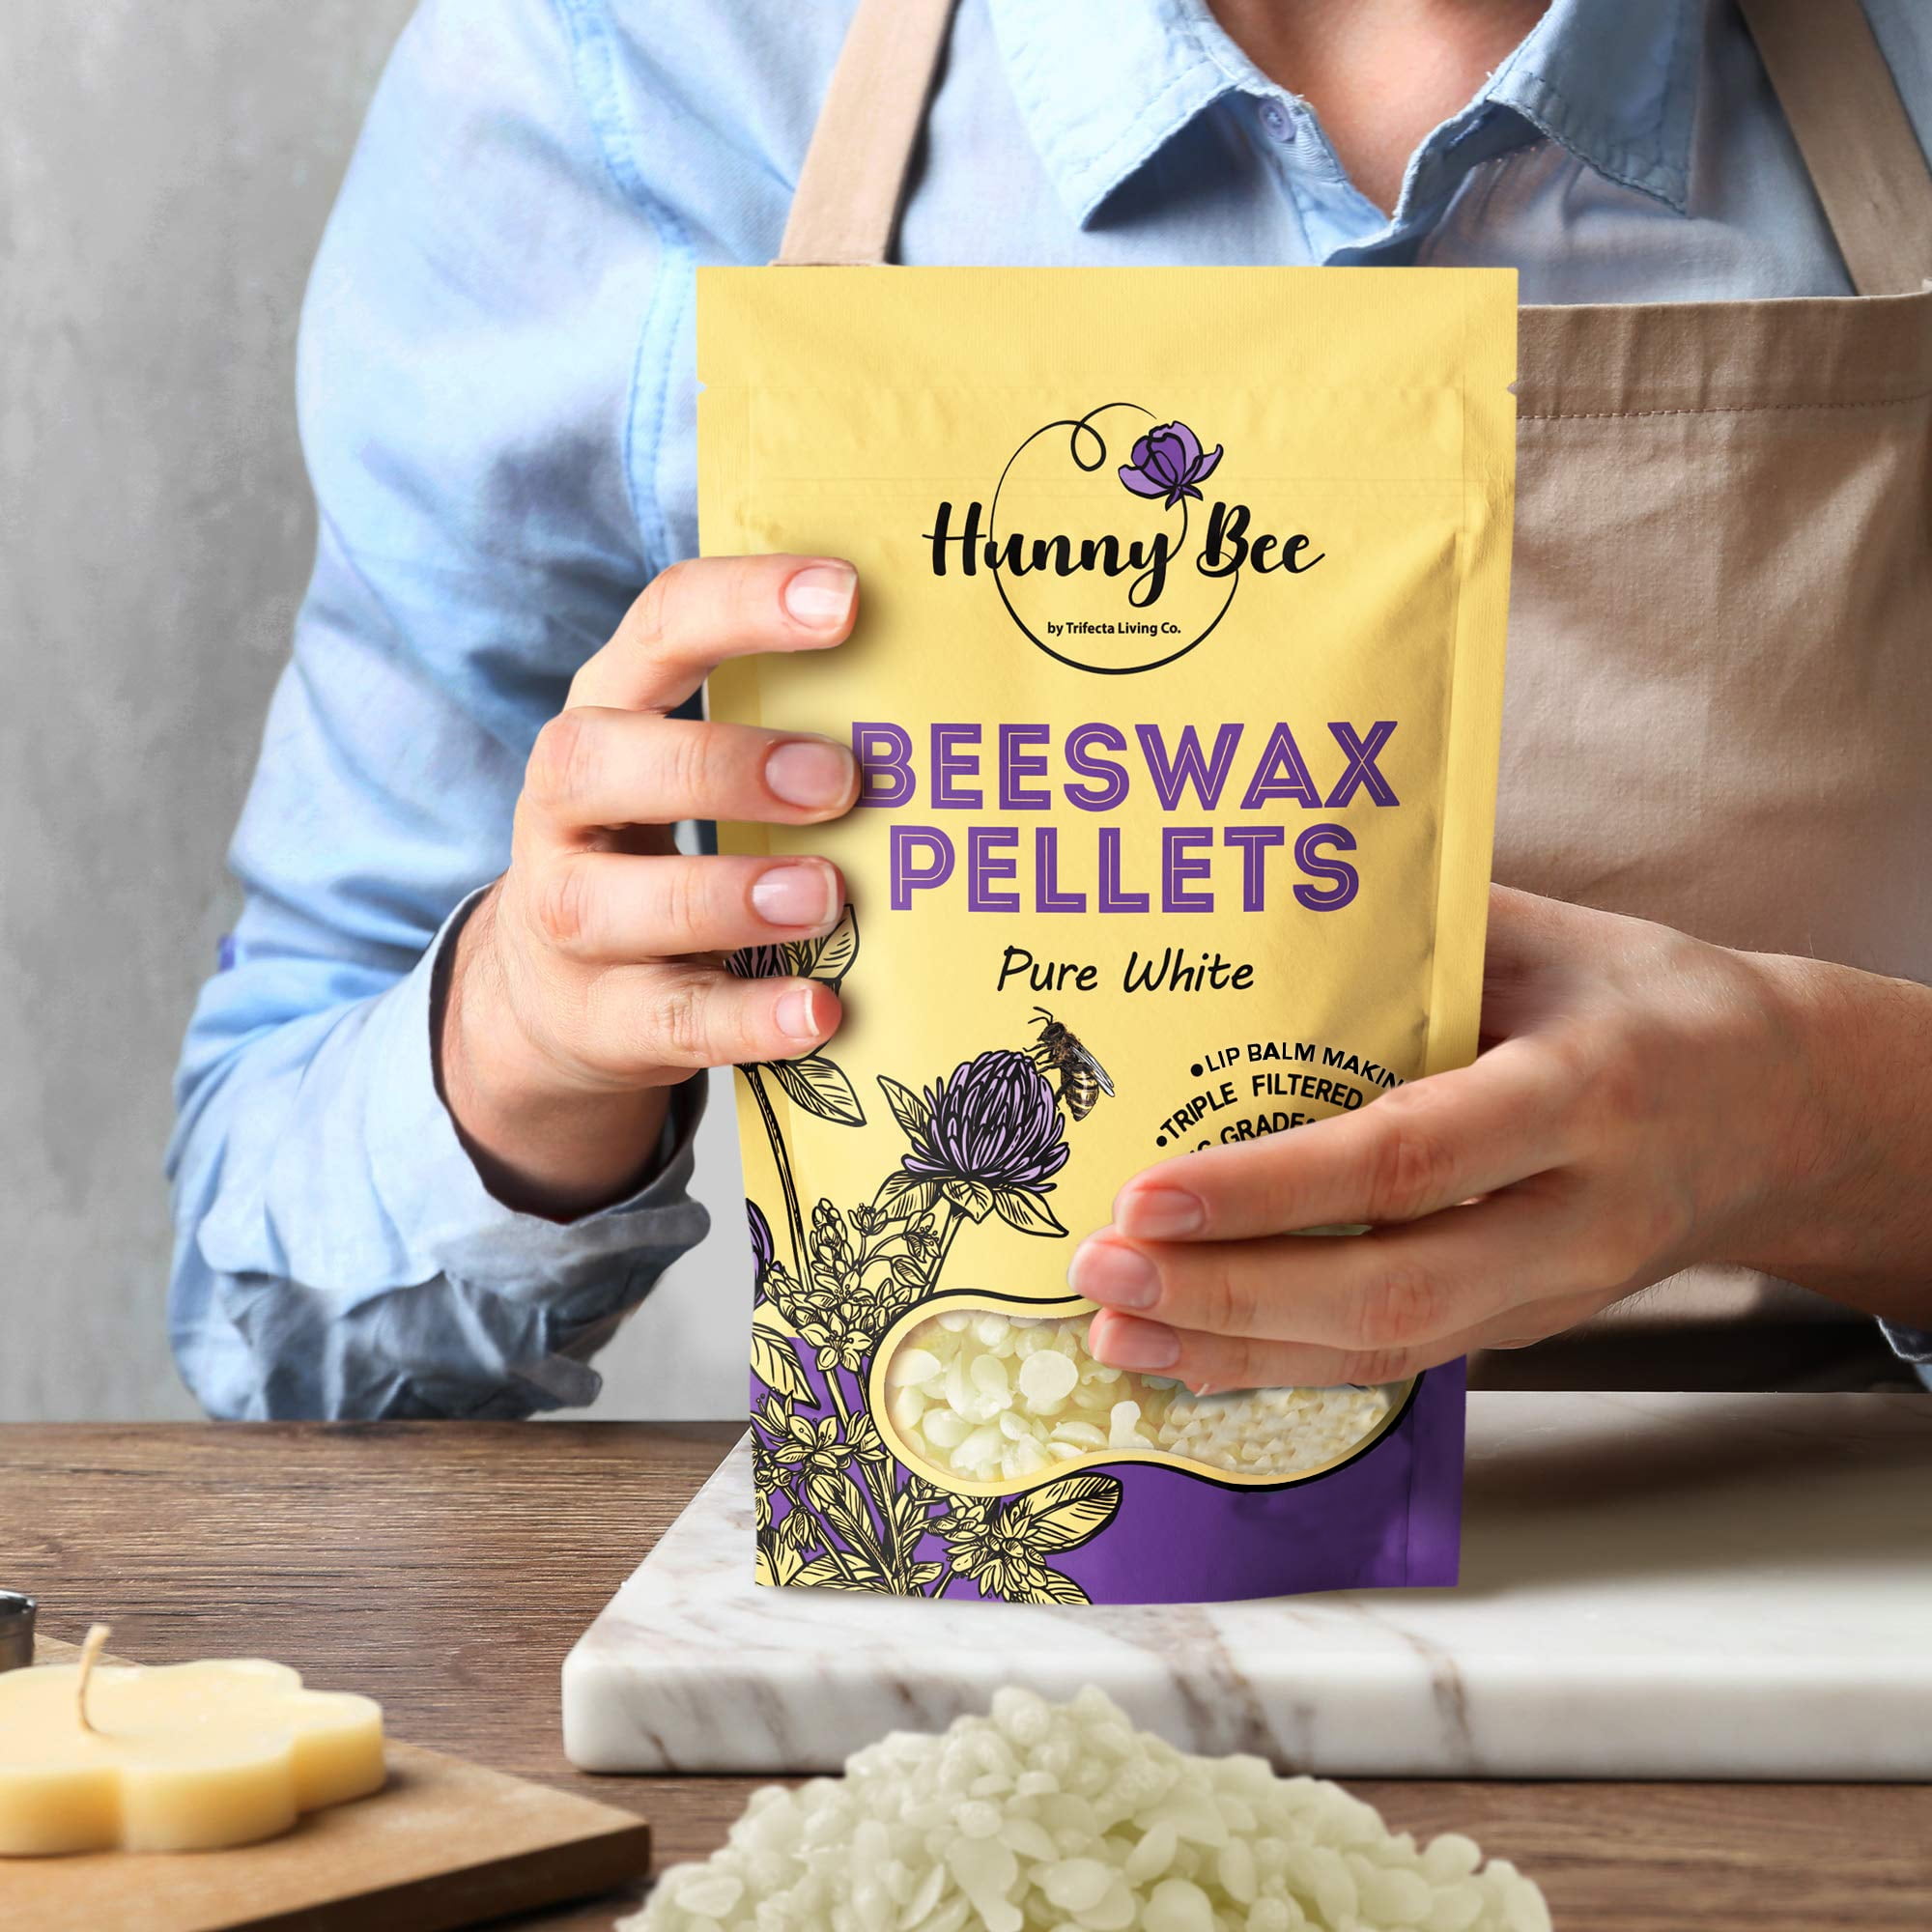 Hunnybee White Beeswax Pellets - 1lb Triple Filtered Bees Wax ideal for  Lotion Making, Candle Making, and Lip Balm Making 